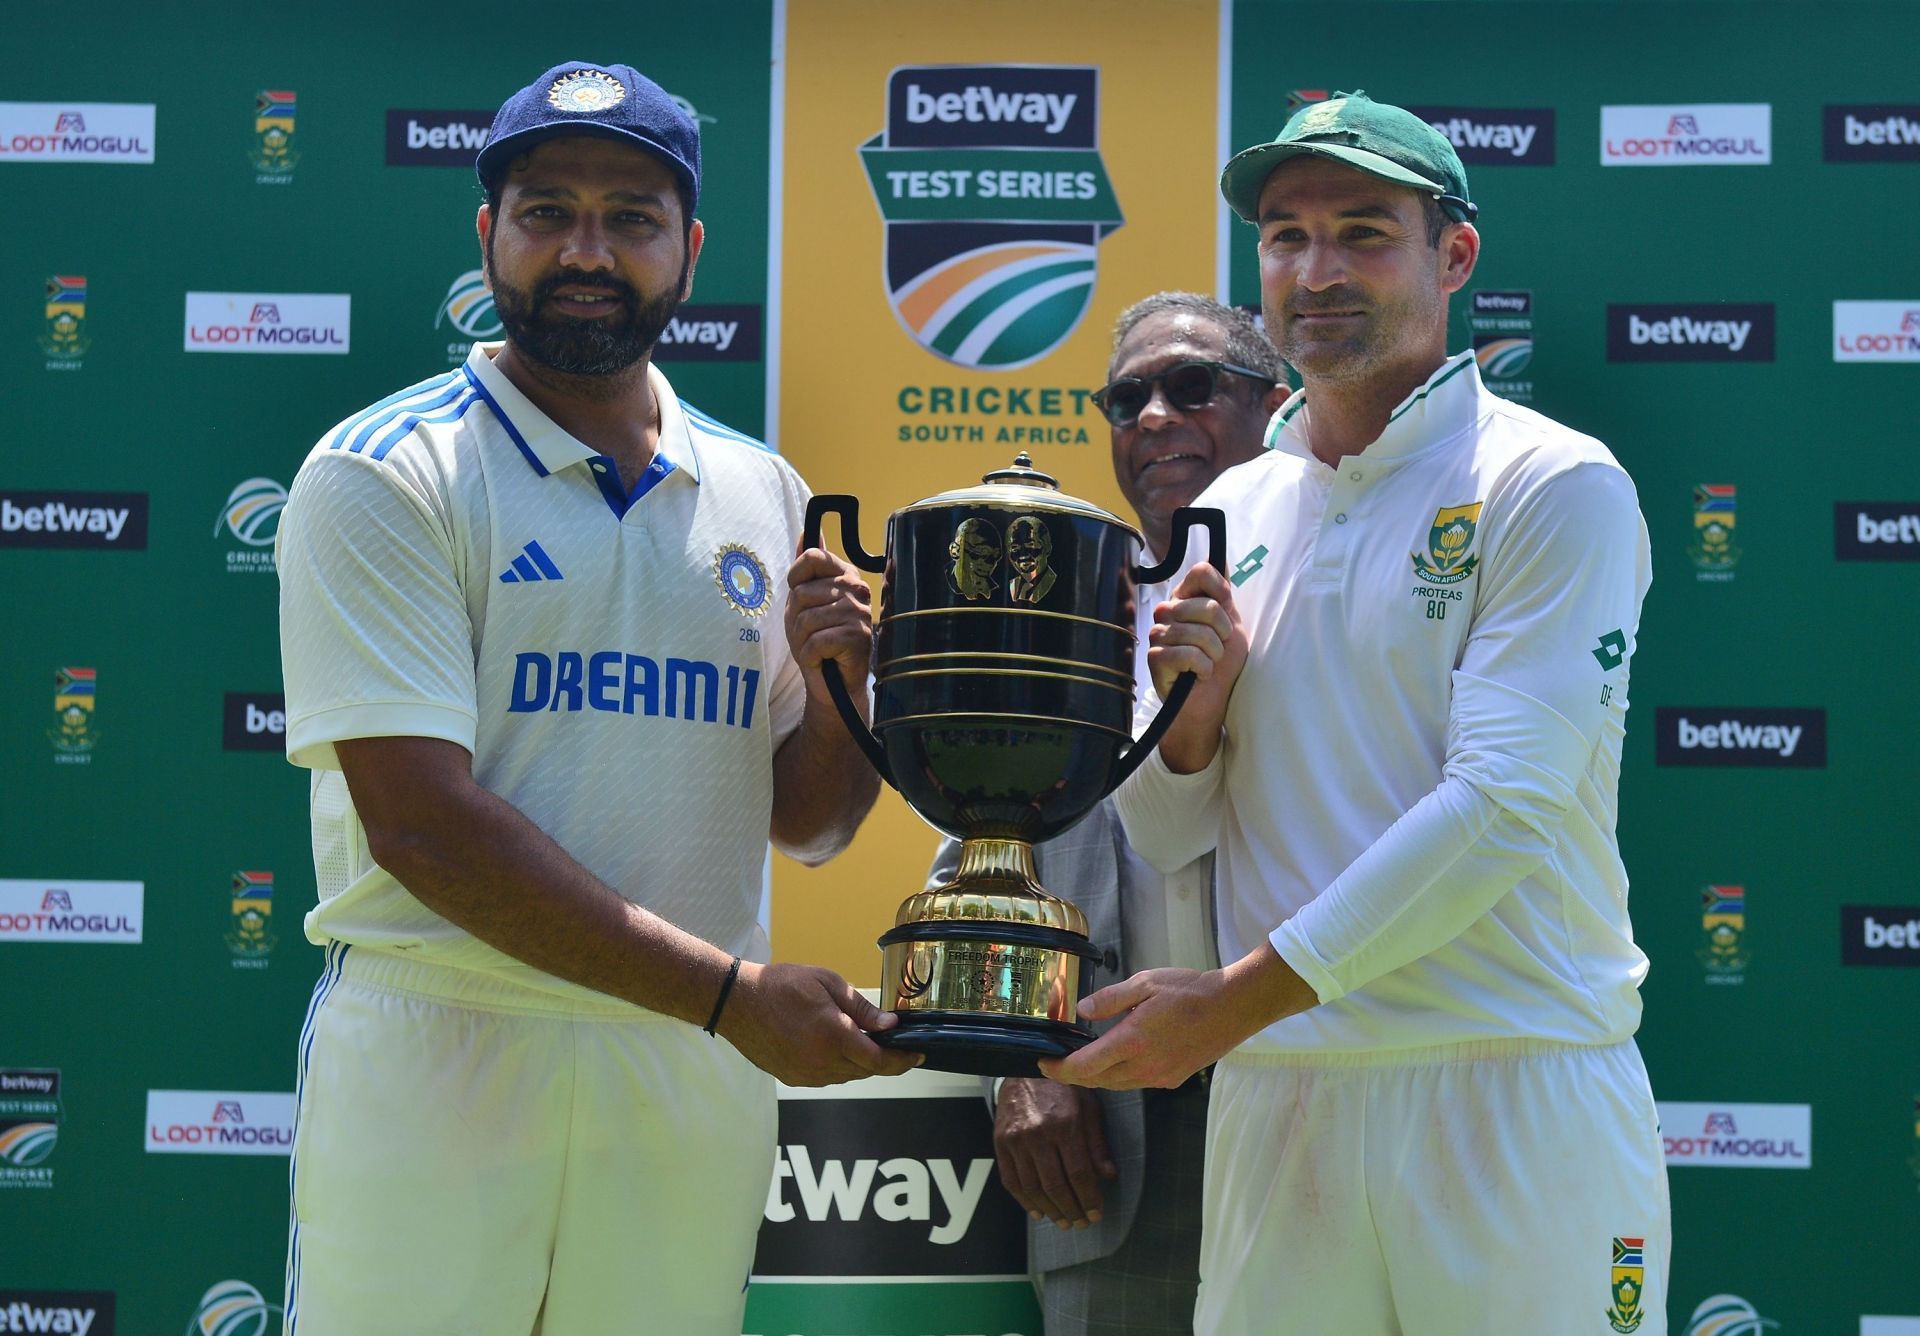 Rohit Sharma led India to a series-leveling maiden Test win in Cape Town. [P/C: Getty]